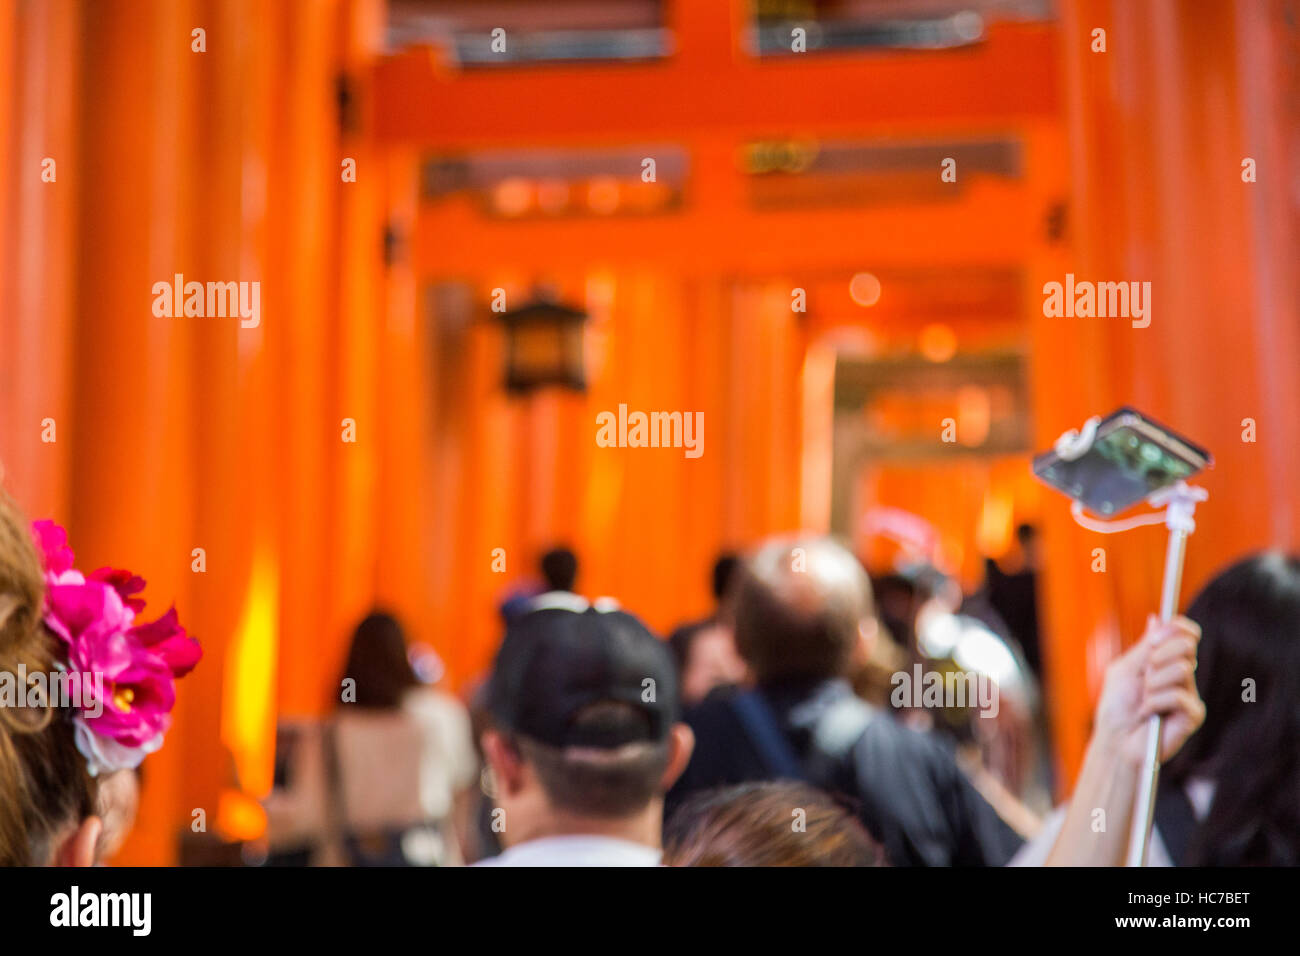 KYOTO, JAPAN - OCTOBER 8, 2016: Unidentified people at walkway in Fushimi Inari shrine in Kyoto, Japan. This popular shrine have 32,000 sub-shrines  t Stock Photo